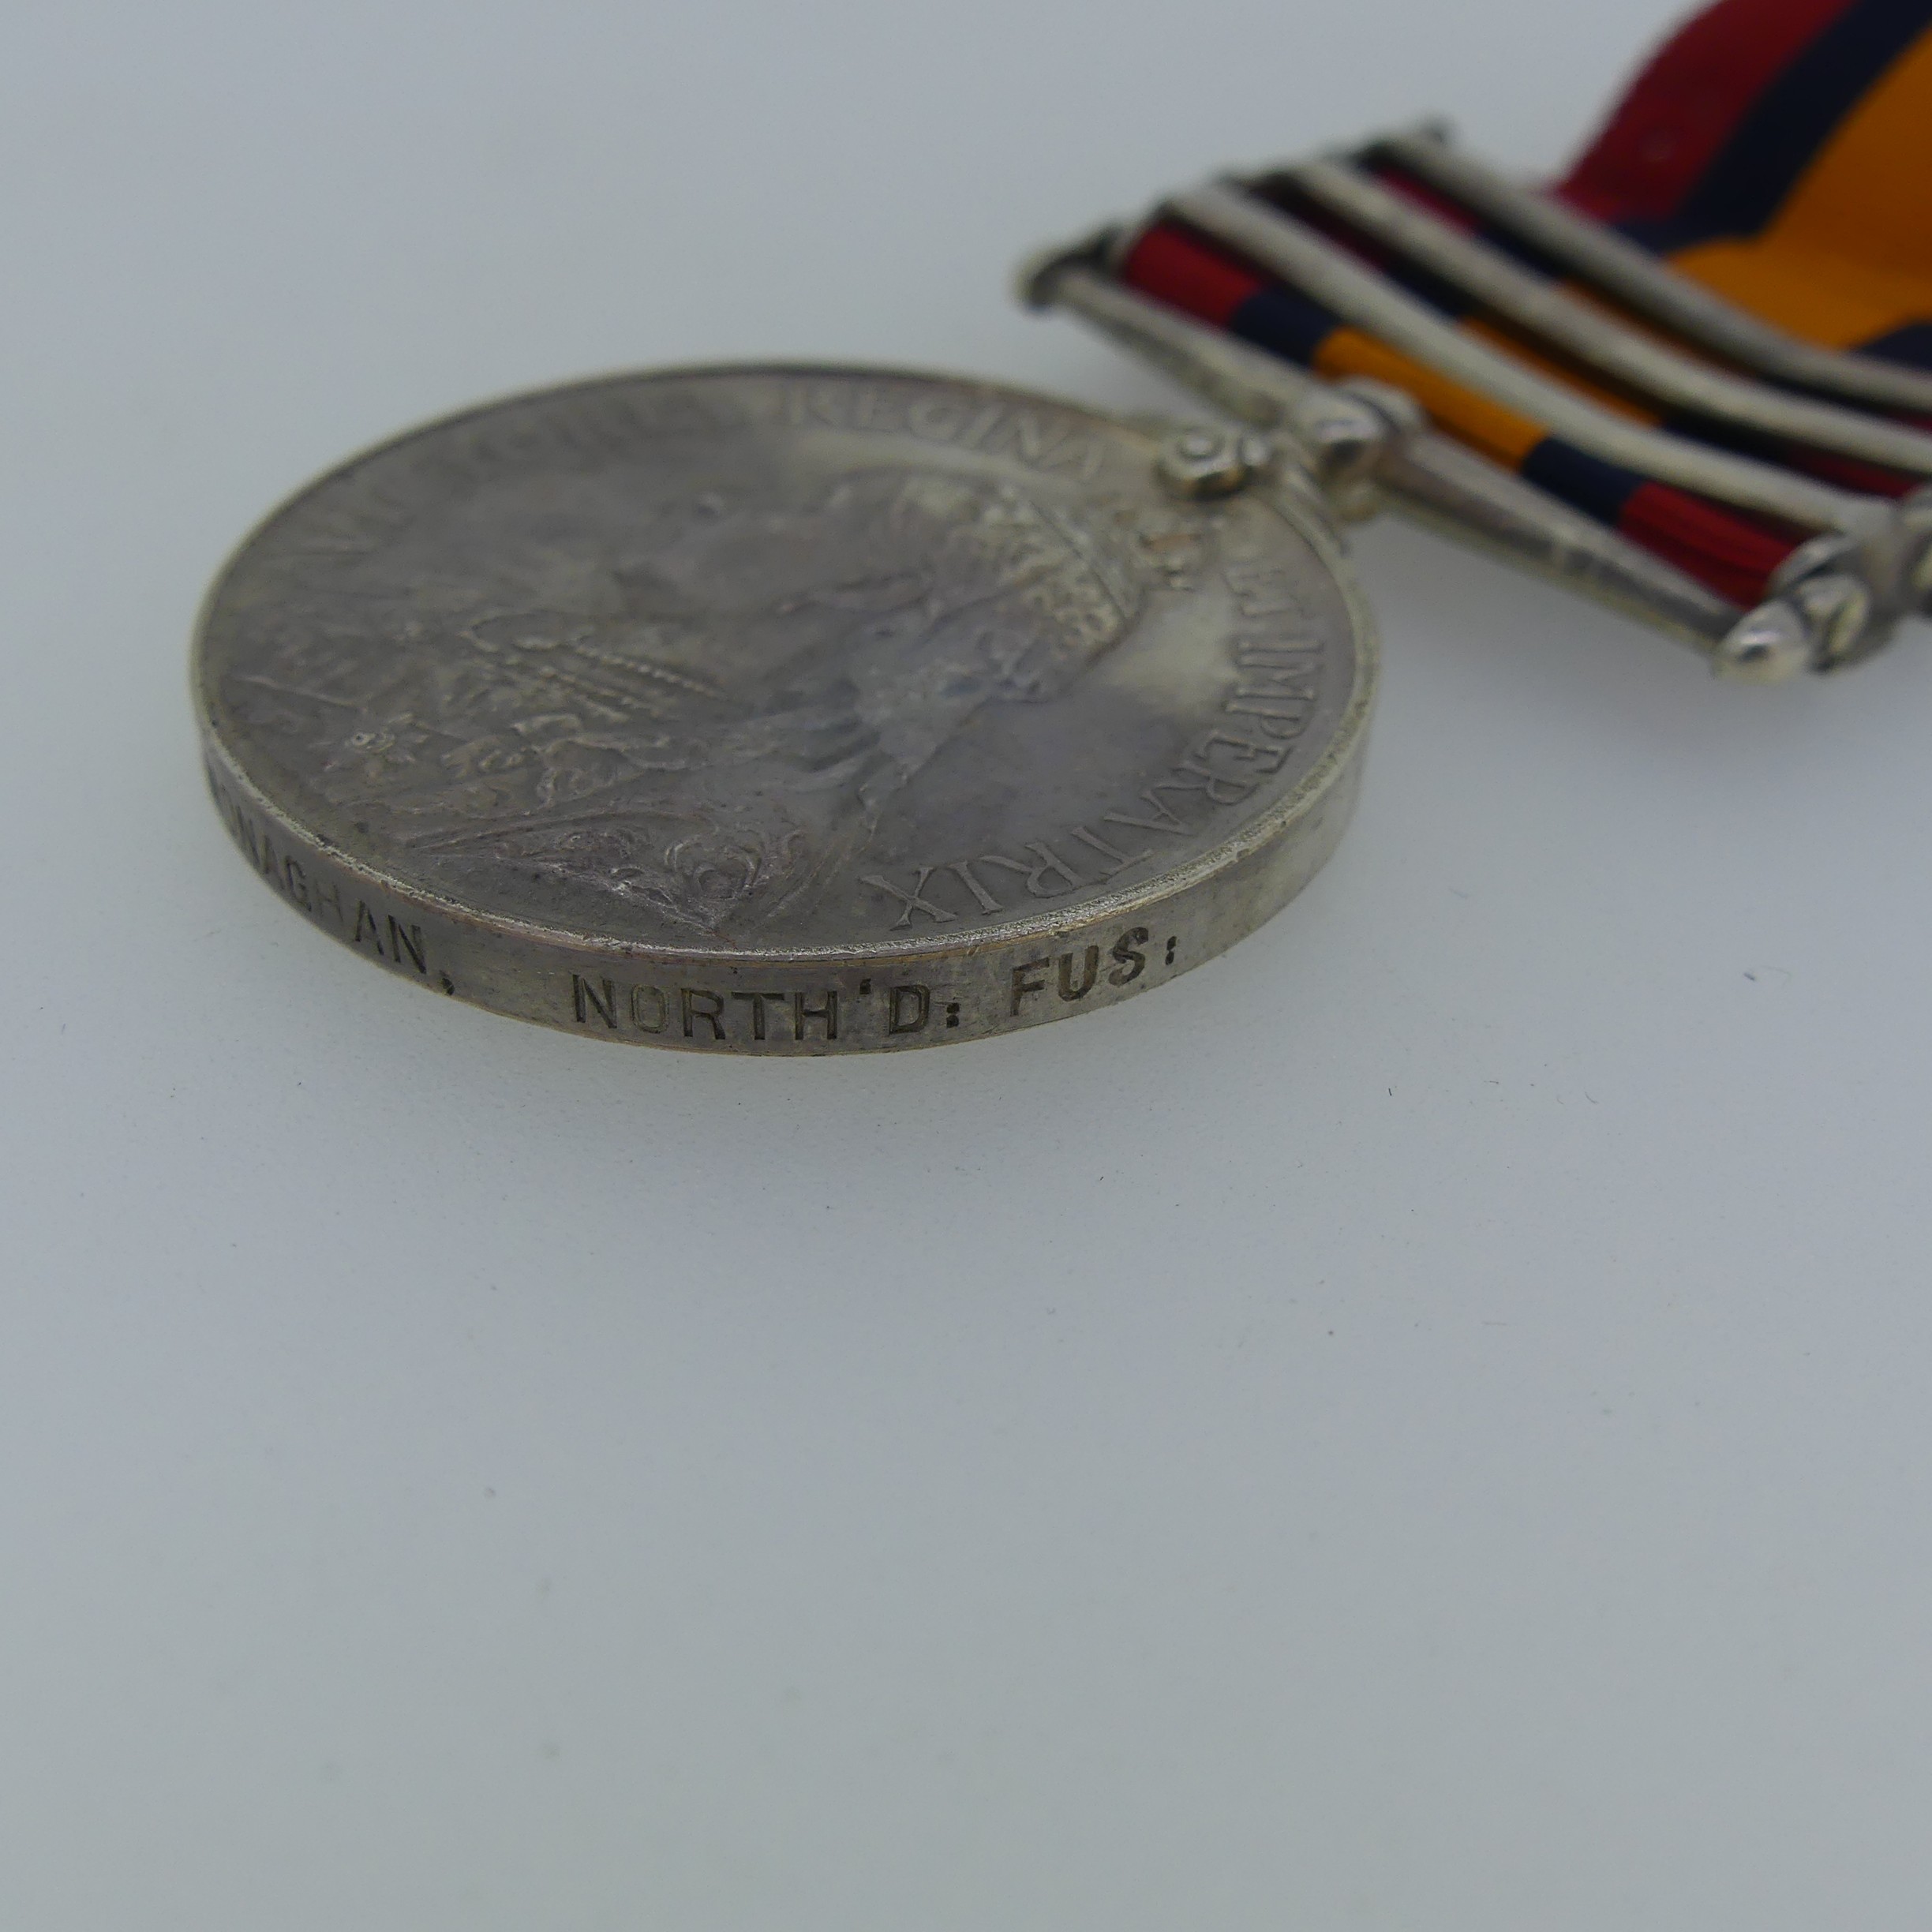 Queen's South Africa Medal (Three clasps: Transvaal, Orange Free State, Cape Colony) 6842 Pte T. - Image 5 of 5